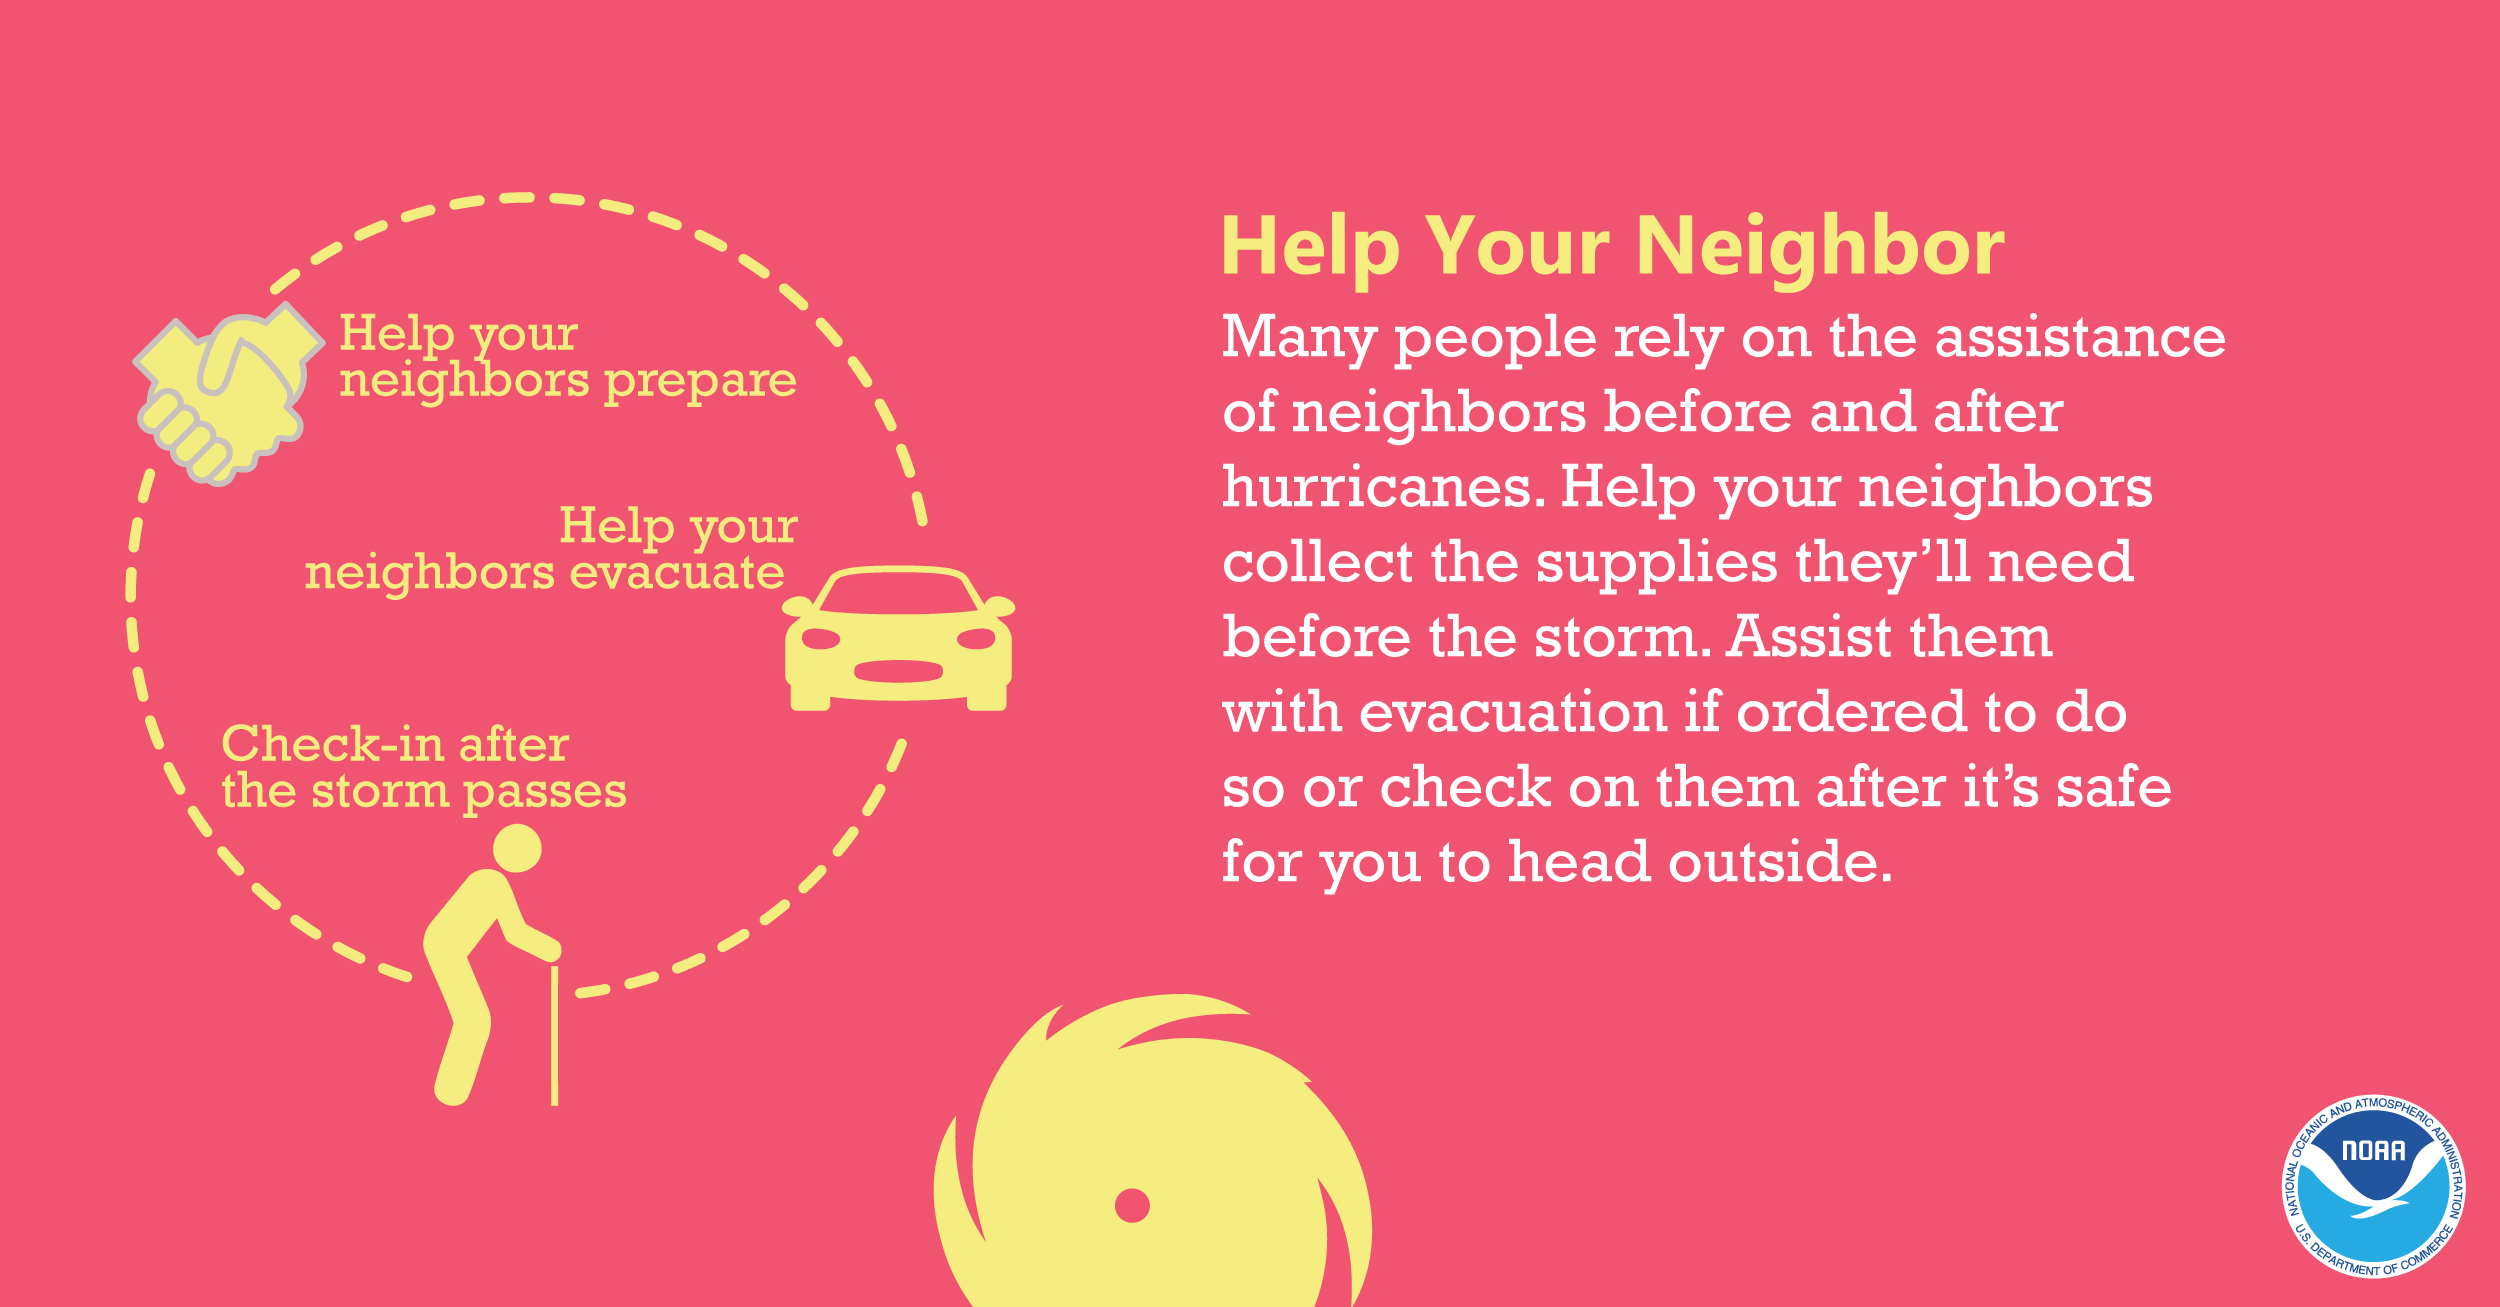 Help Your Neighbor: Many people rely on the assistance of neighbors before and after hurricanes. Help your neighbors collect the supplies they'll need before the storm. Assist them with evacuation if ordered to do so or check on them after it's safe for you to head outside.